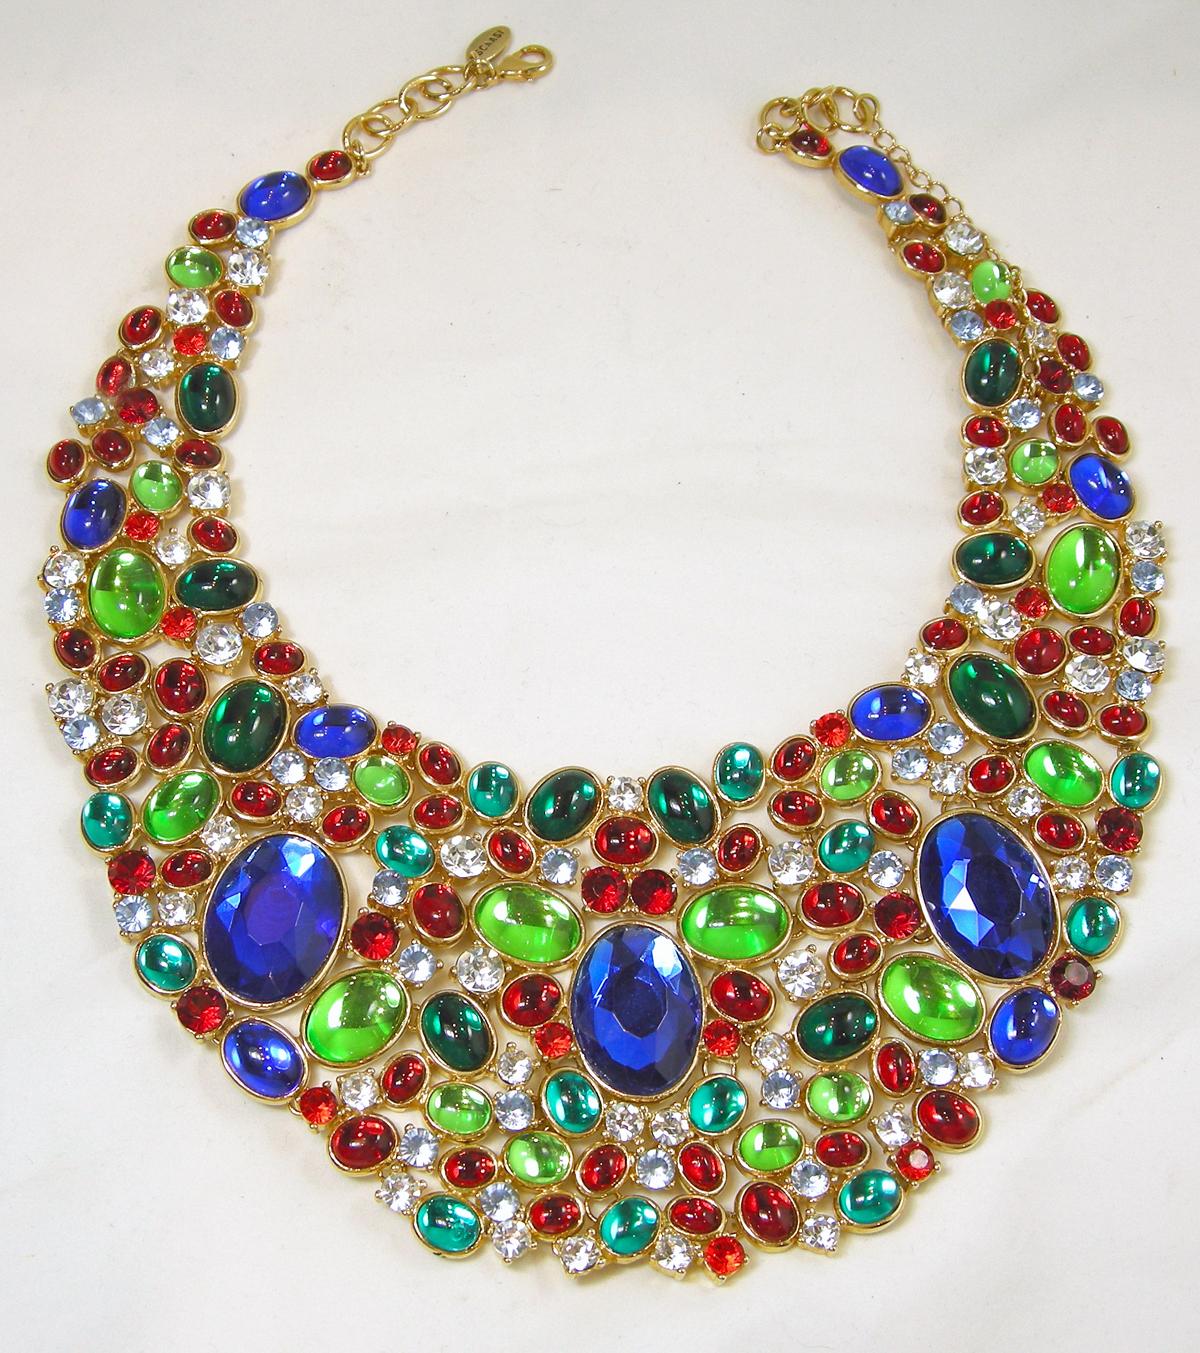 This magnificent, large bib necklace is designed by Arnold Scaasi.  The necklace is embodied with multi colors of green, blue, red, aquamarine and clear crystals mixing faceted and cabochon stones.  It is signed “Scaasi” on the tag and on the back. 